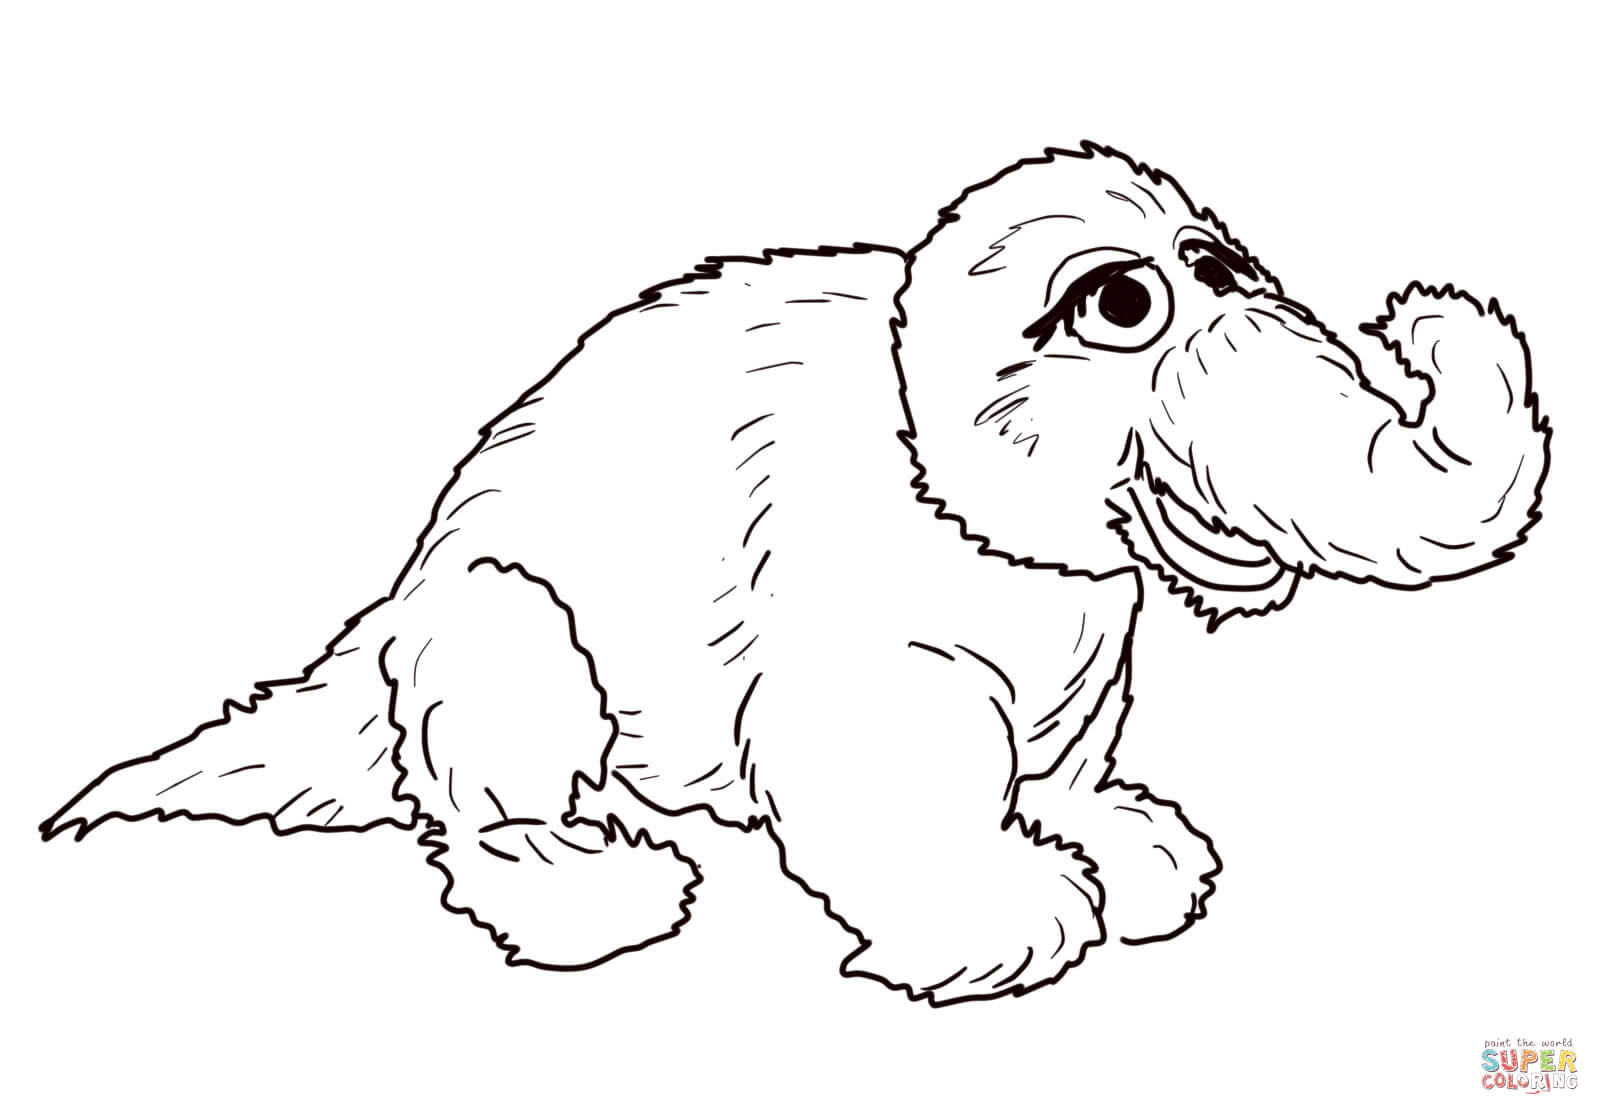 Coloring Pages Of Stuffed Animals Snuffleupagus Stuffed Animal Coloring Page Free Printable Coloring